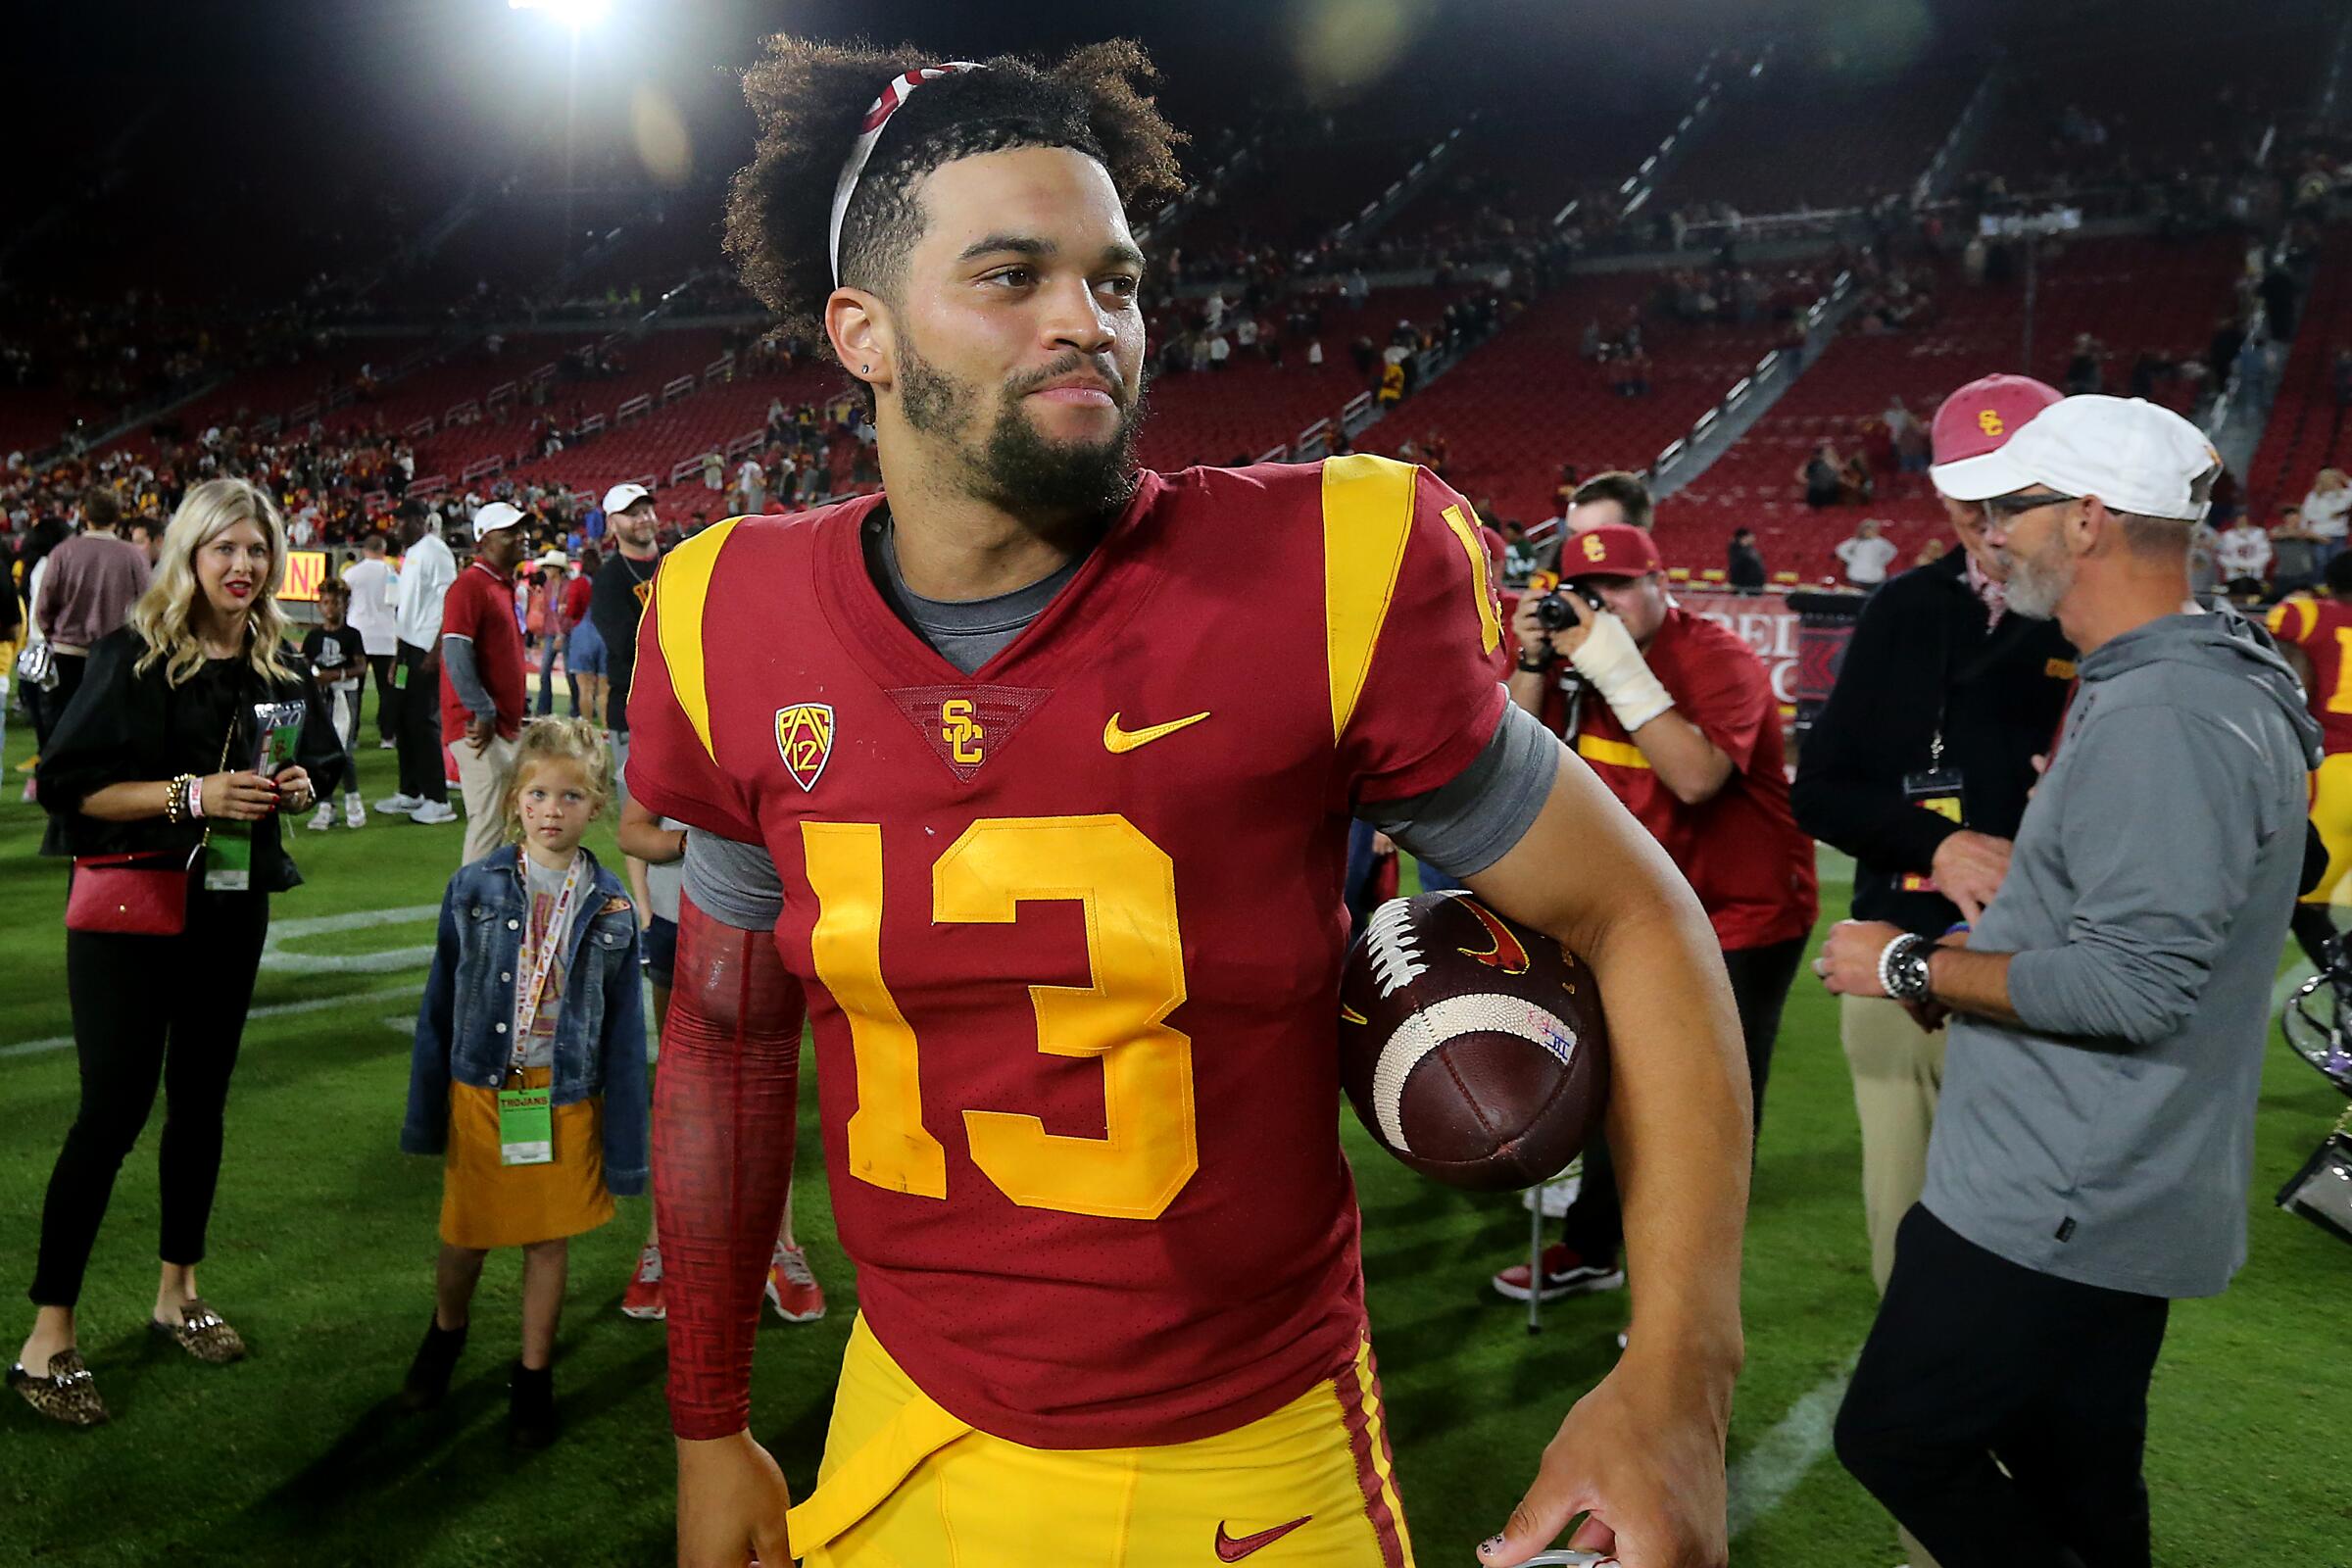 USC quarterback Caleb Williams walks off the field after a win over Arizona State on Oct. 1.